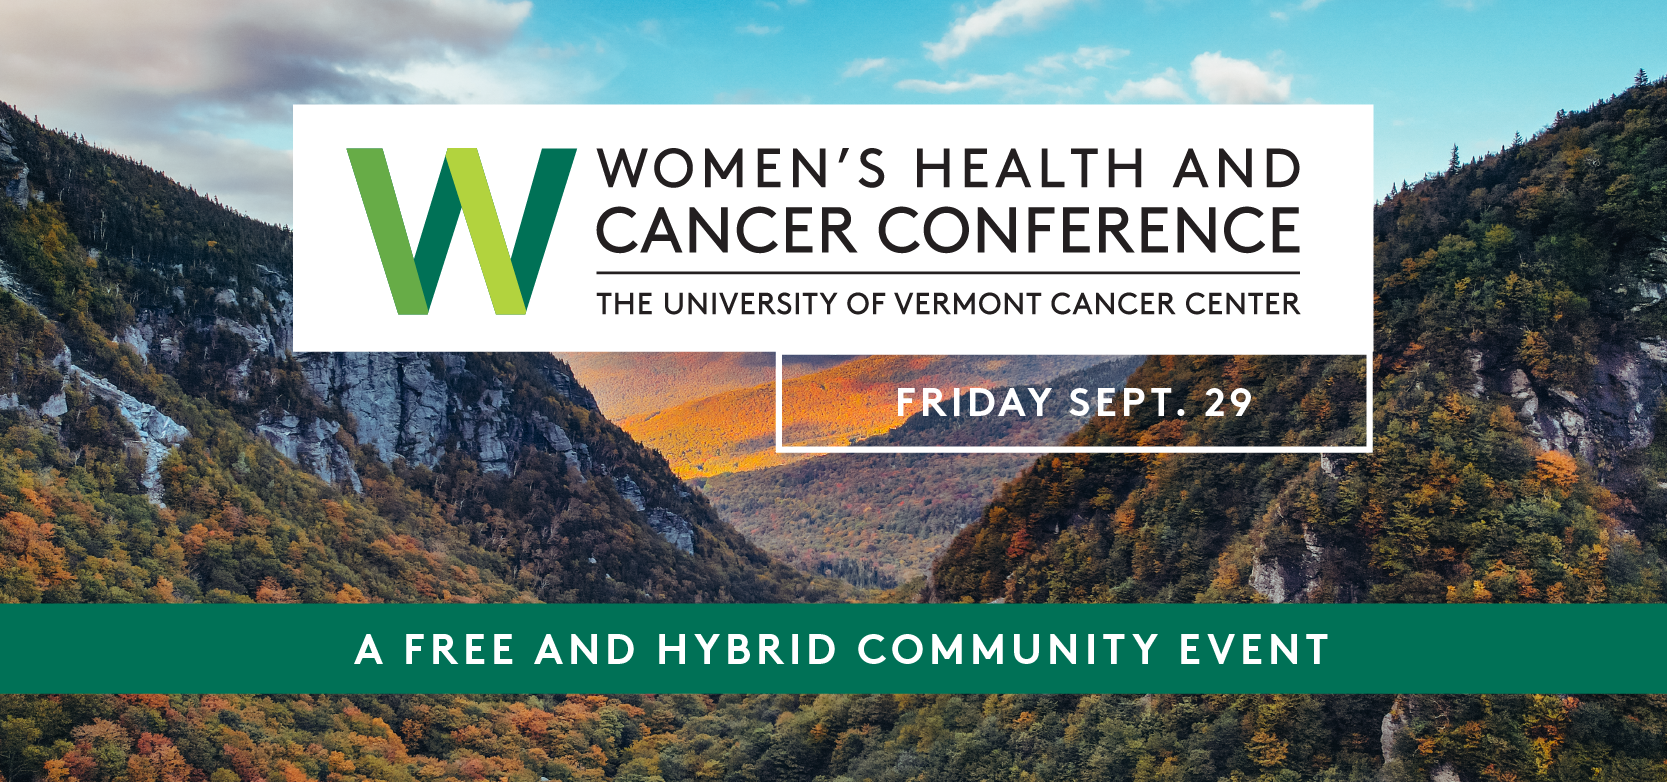 Dr. Suzan White will be a Guest Speaker at the 2023 Women's Health and Cancer Conference</a></div>
                                            <div class=